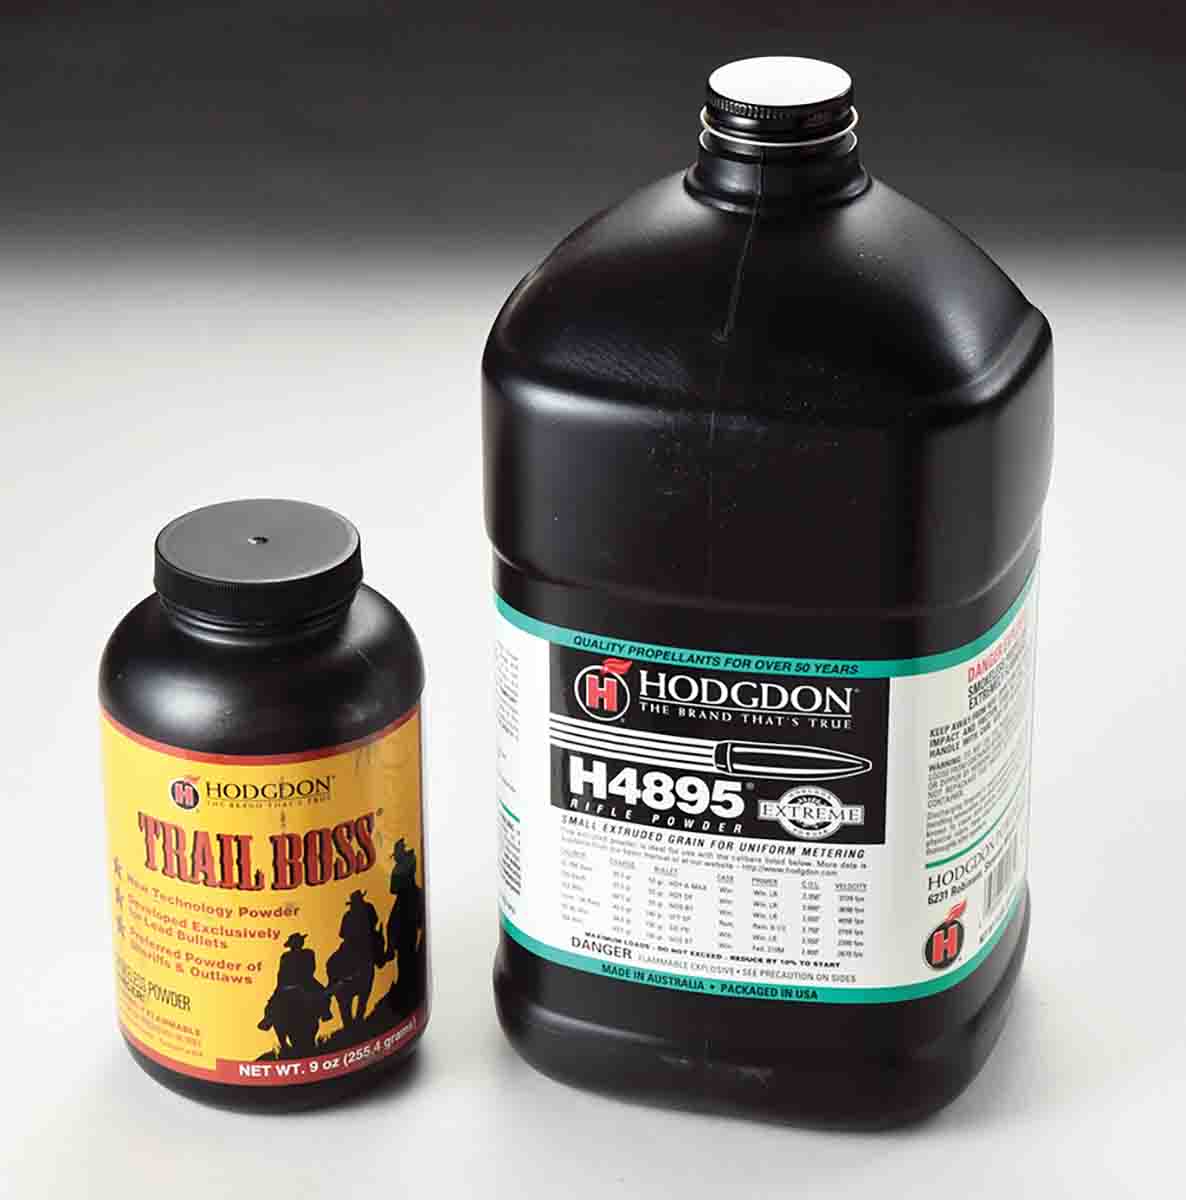 Hodgdon offers reduced load formulas for both of these propellants in many rifle cartridges. In a .22-250 Remington, Trail Boss works for very slow loads while H-4895 is for faster reduced loads. The two offer a very wide range of velocity options.